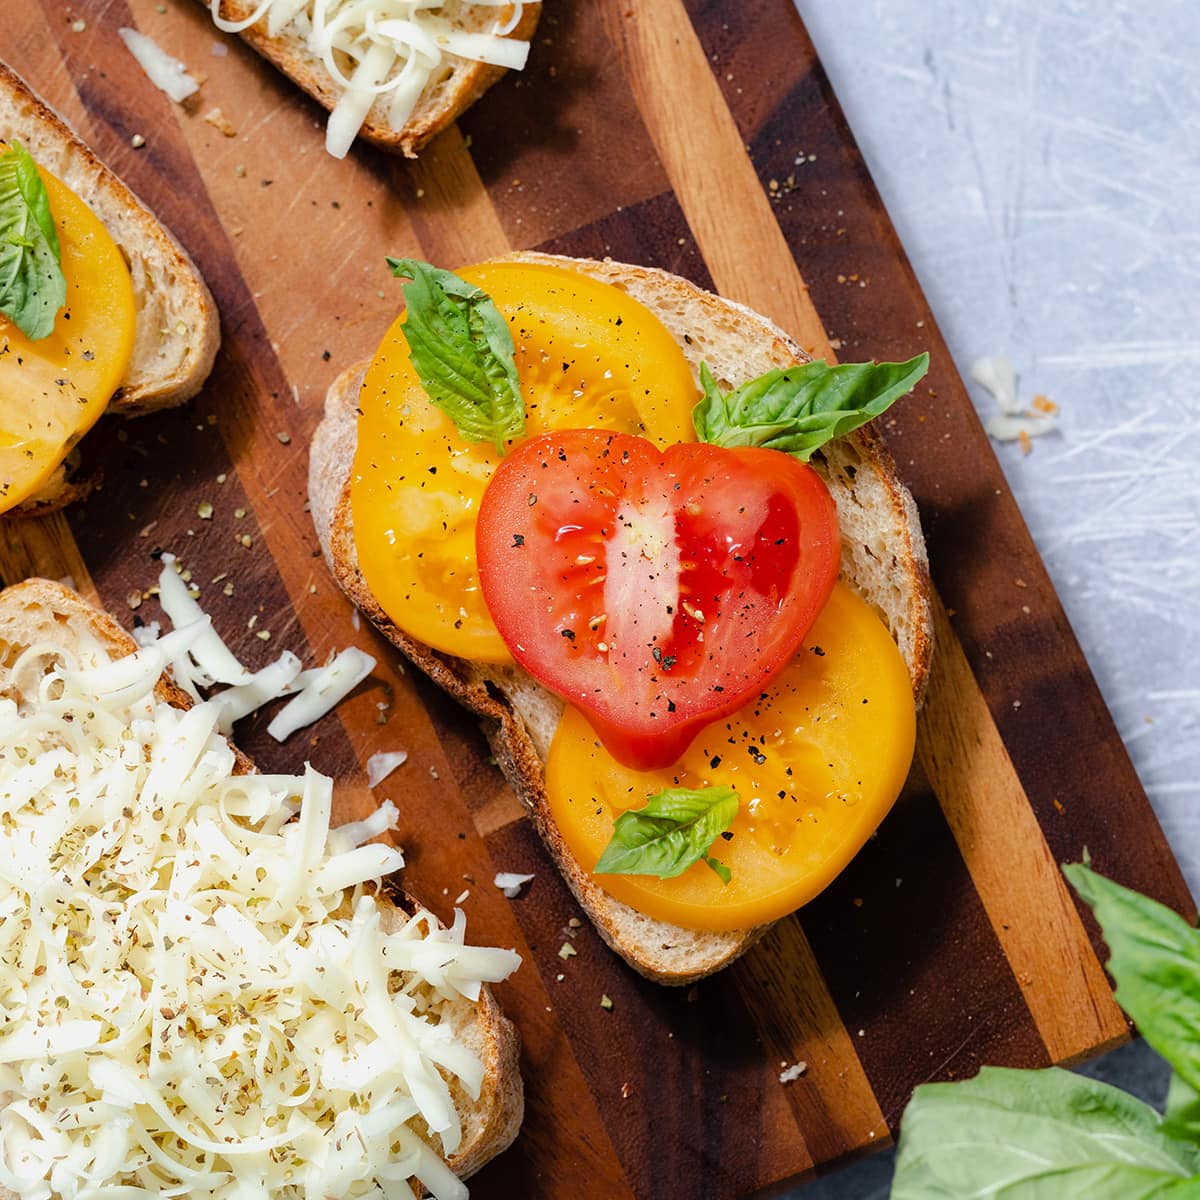 Four slices of bread on a cutting board. The main slice in focus in the middle, layered with sliced heirloom tomatoes and fresh basil. The slice on the bottom left layered with shredded cheese.